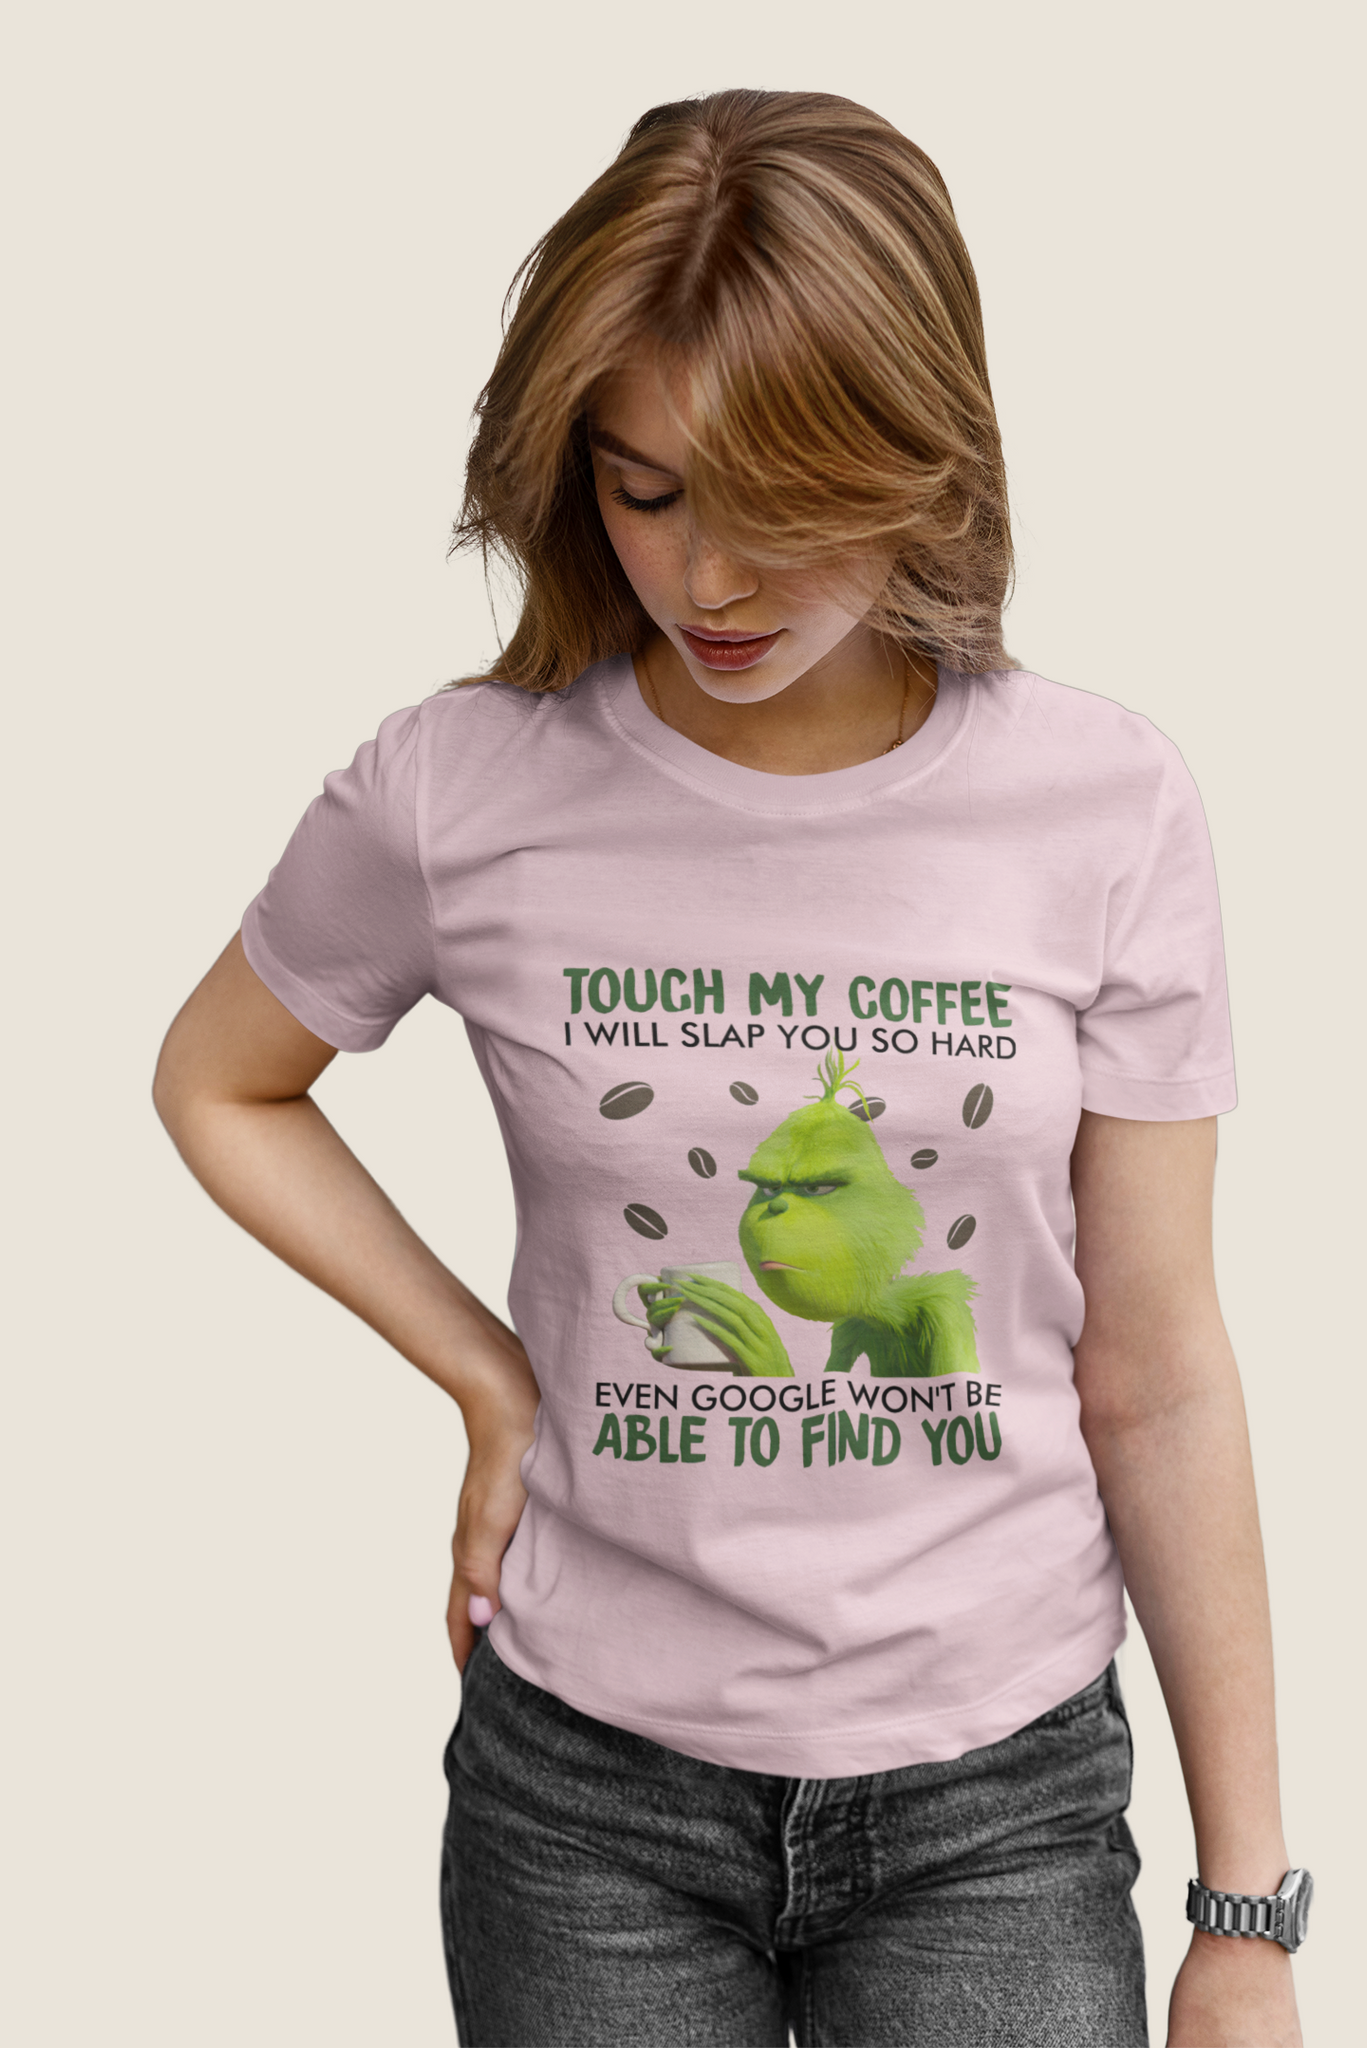 Grinch T Shirt, Touch My Coffee I Will Slap You So Hard T Shirt, Even Google Wont Be Able To Find You Tshirt, Christmas Gifts